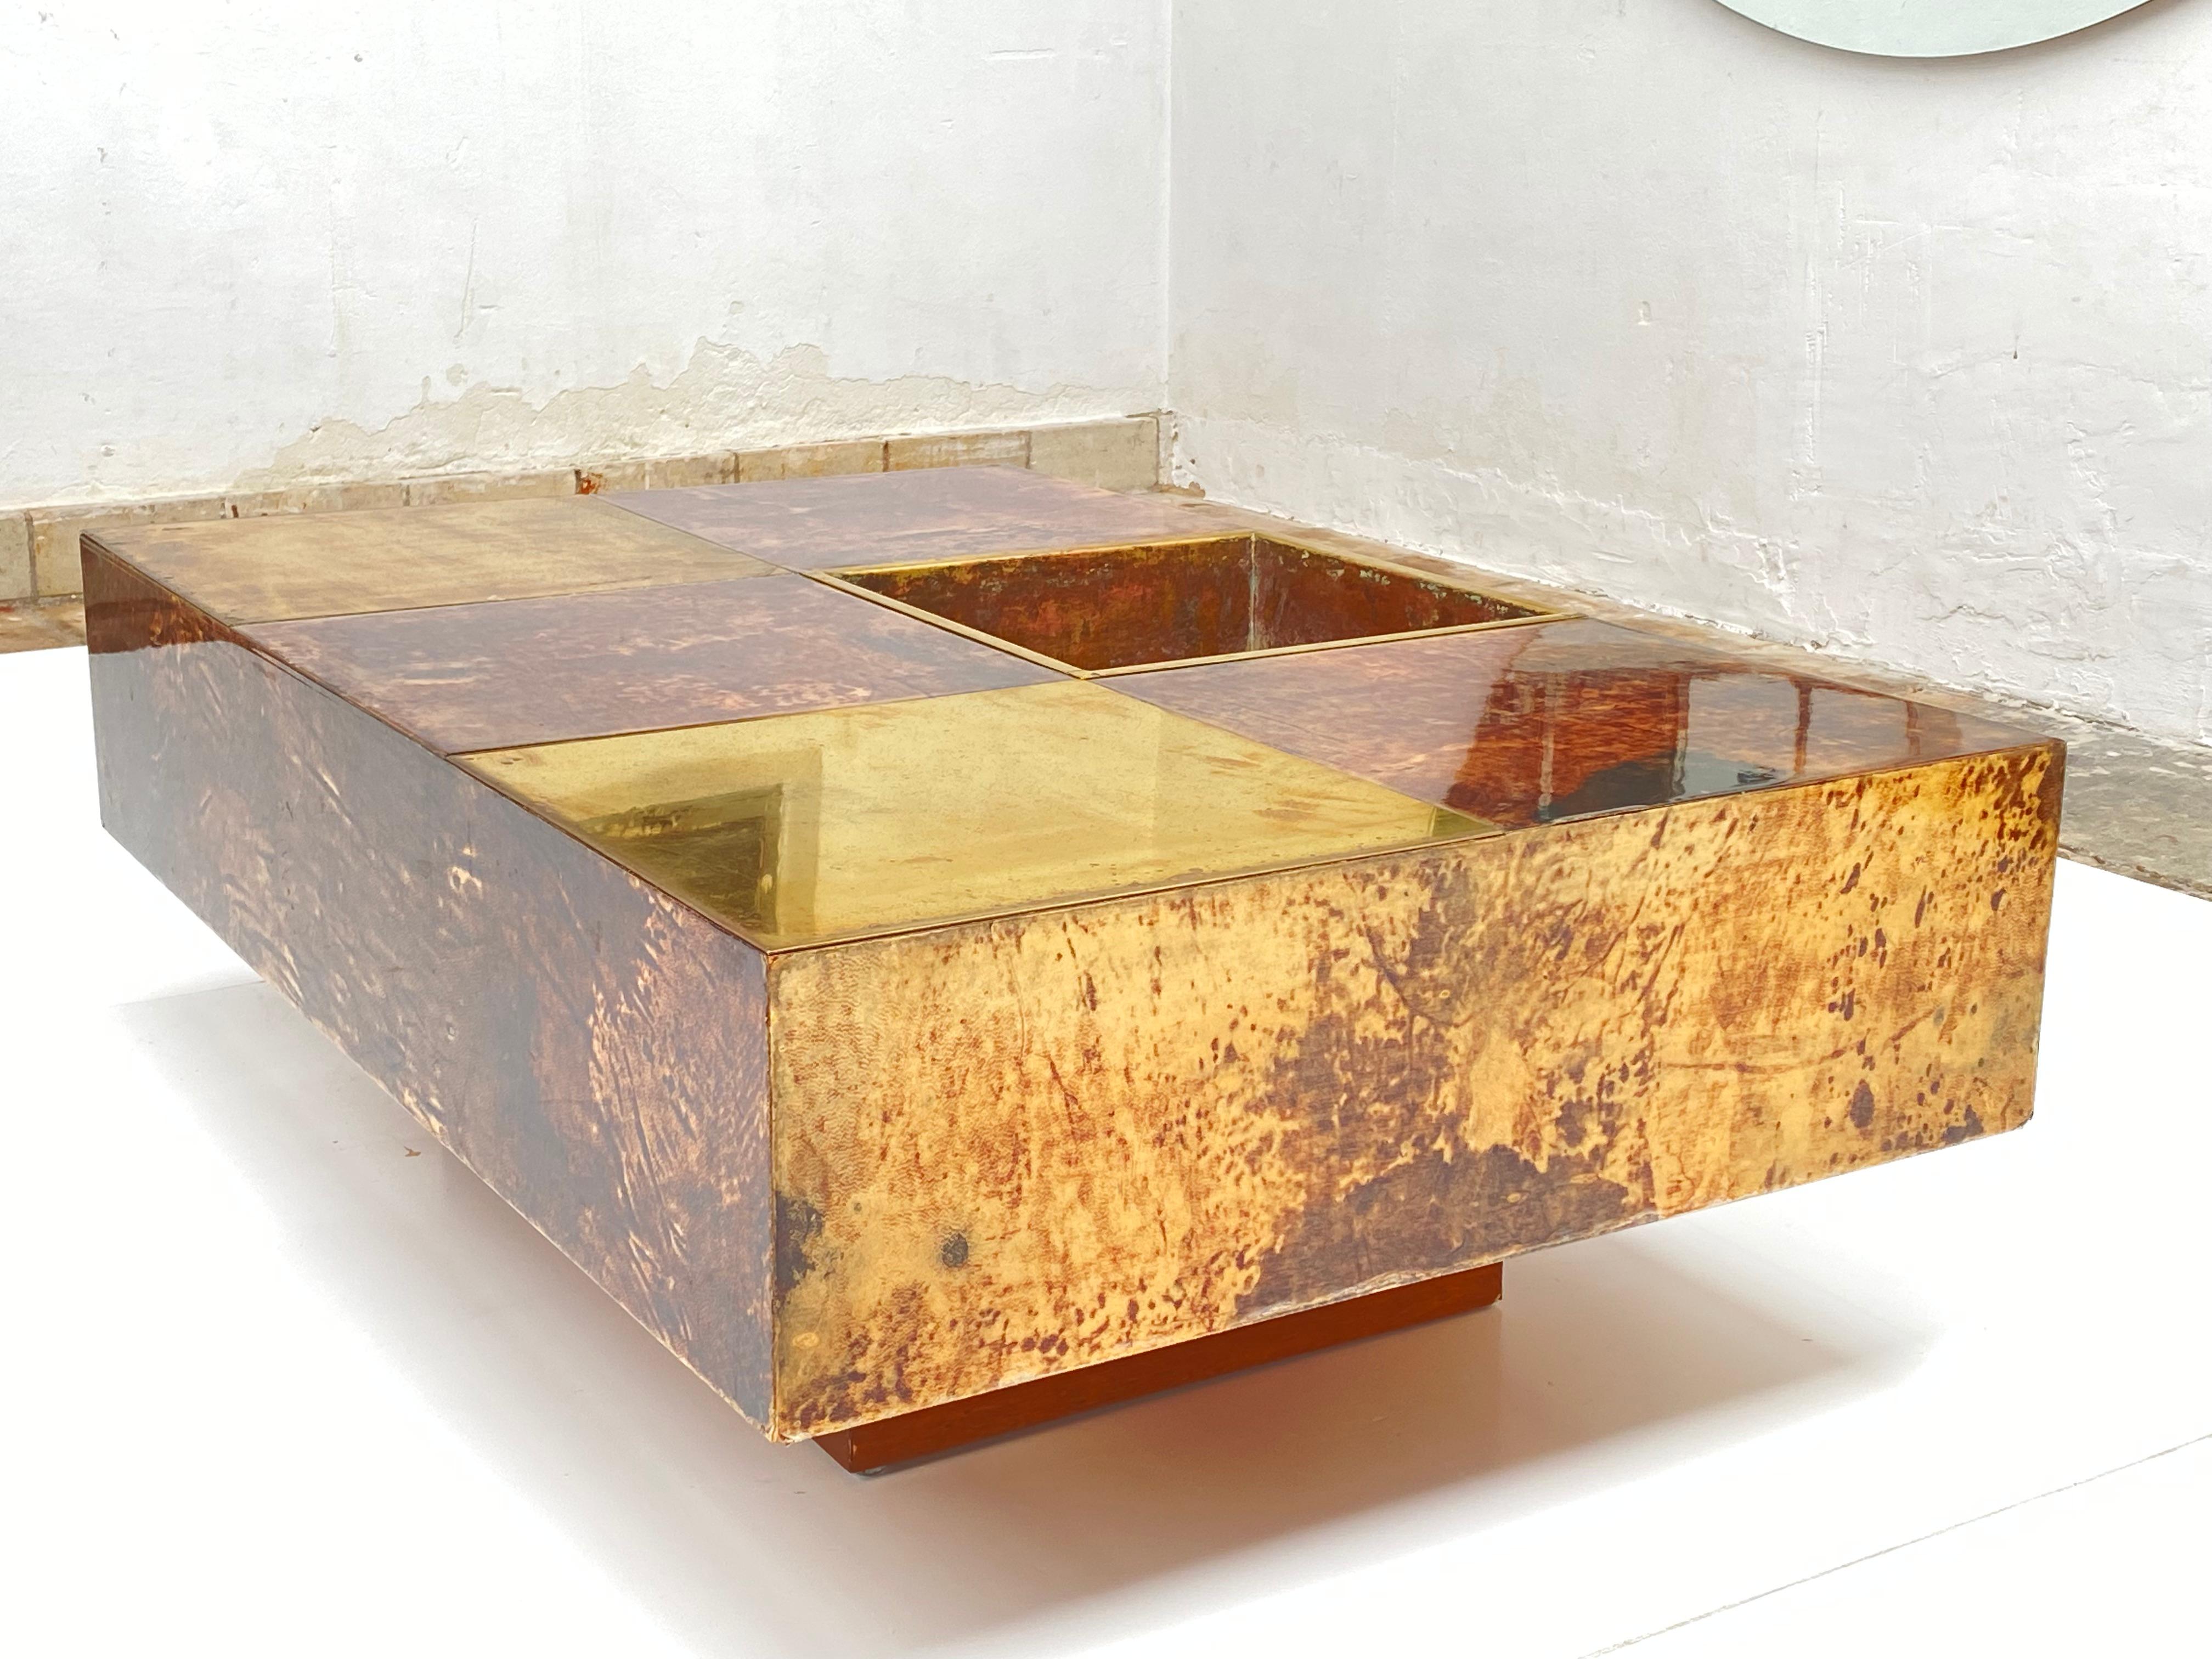 Rare and probably one of a kind planter coffee table in brass and brown lacquered goatskin by Milanese artist, Aldo Tura. Italy, circa 1960s. Exquisite, rare design.

Aldo Tura was born in 1909, and established a furniture production house in